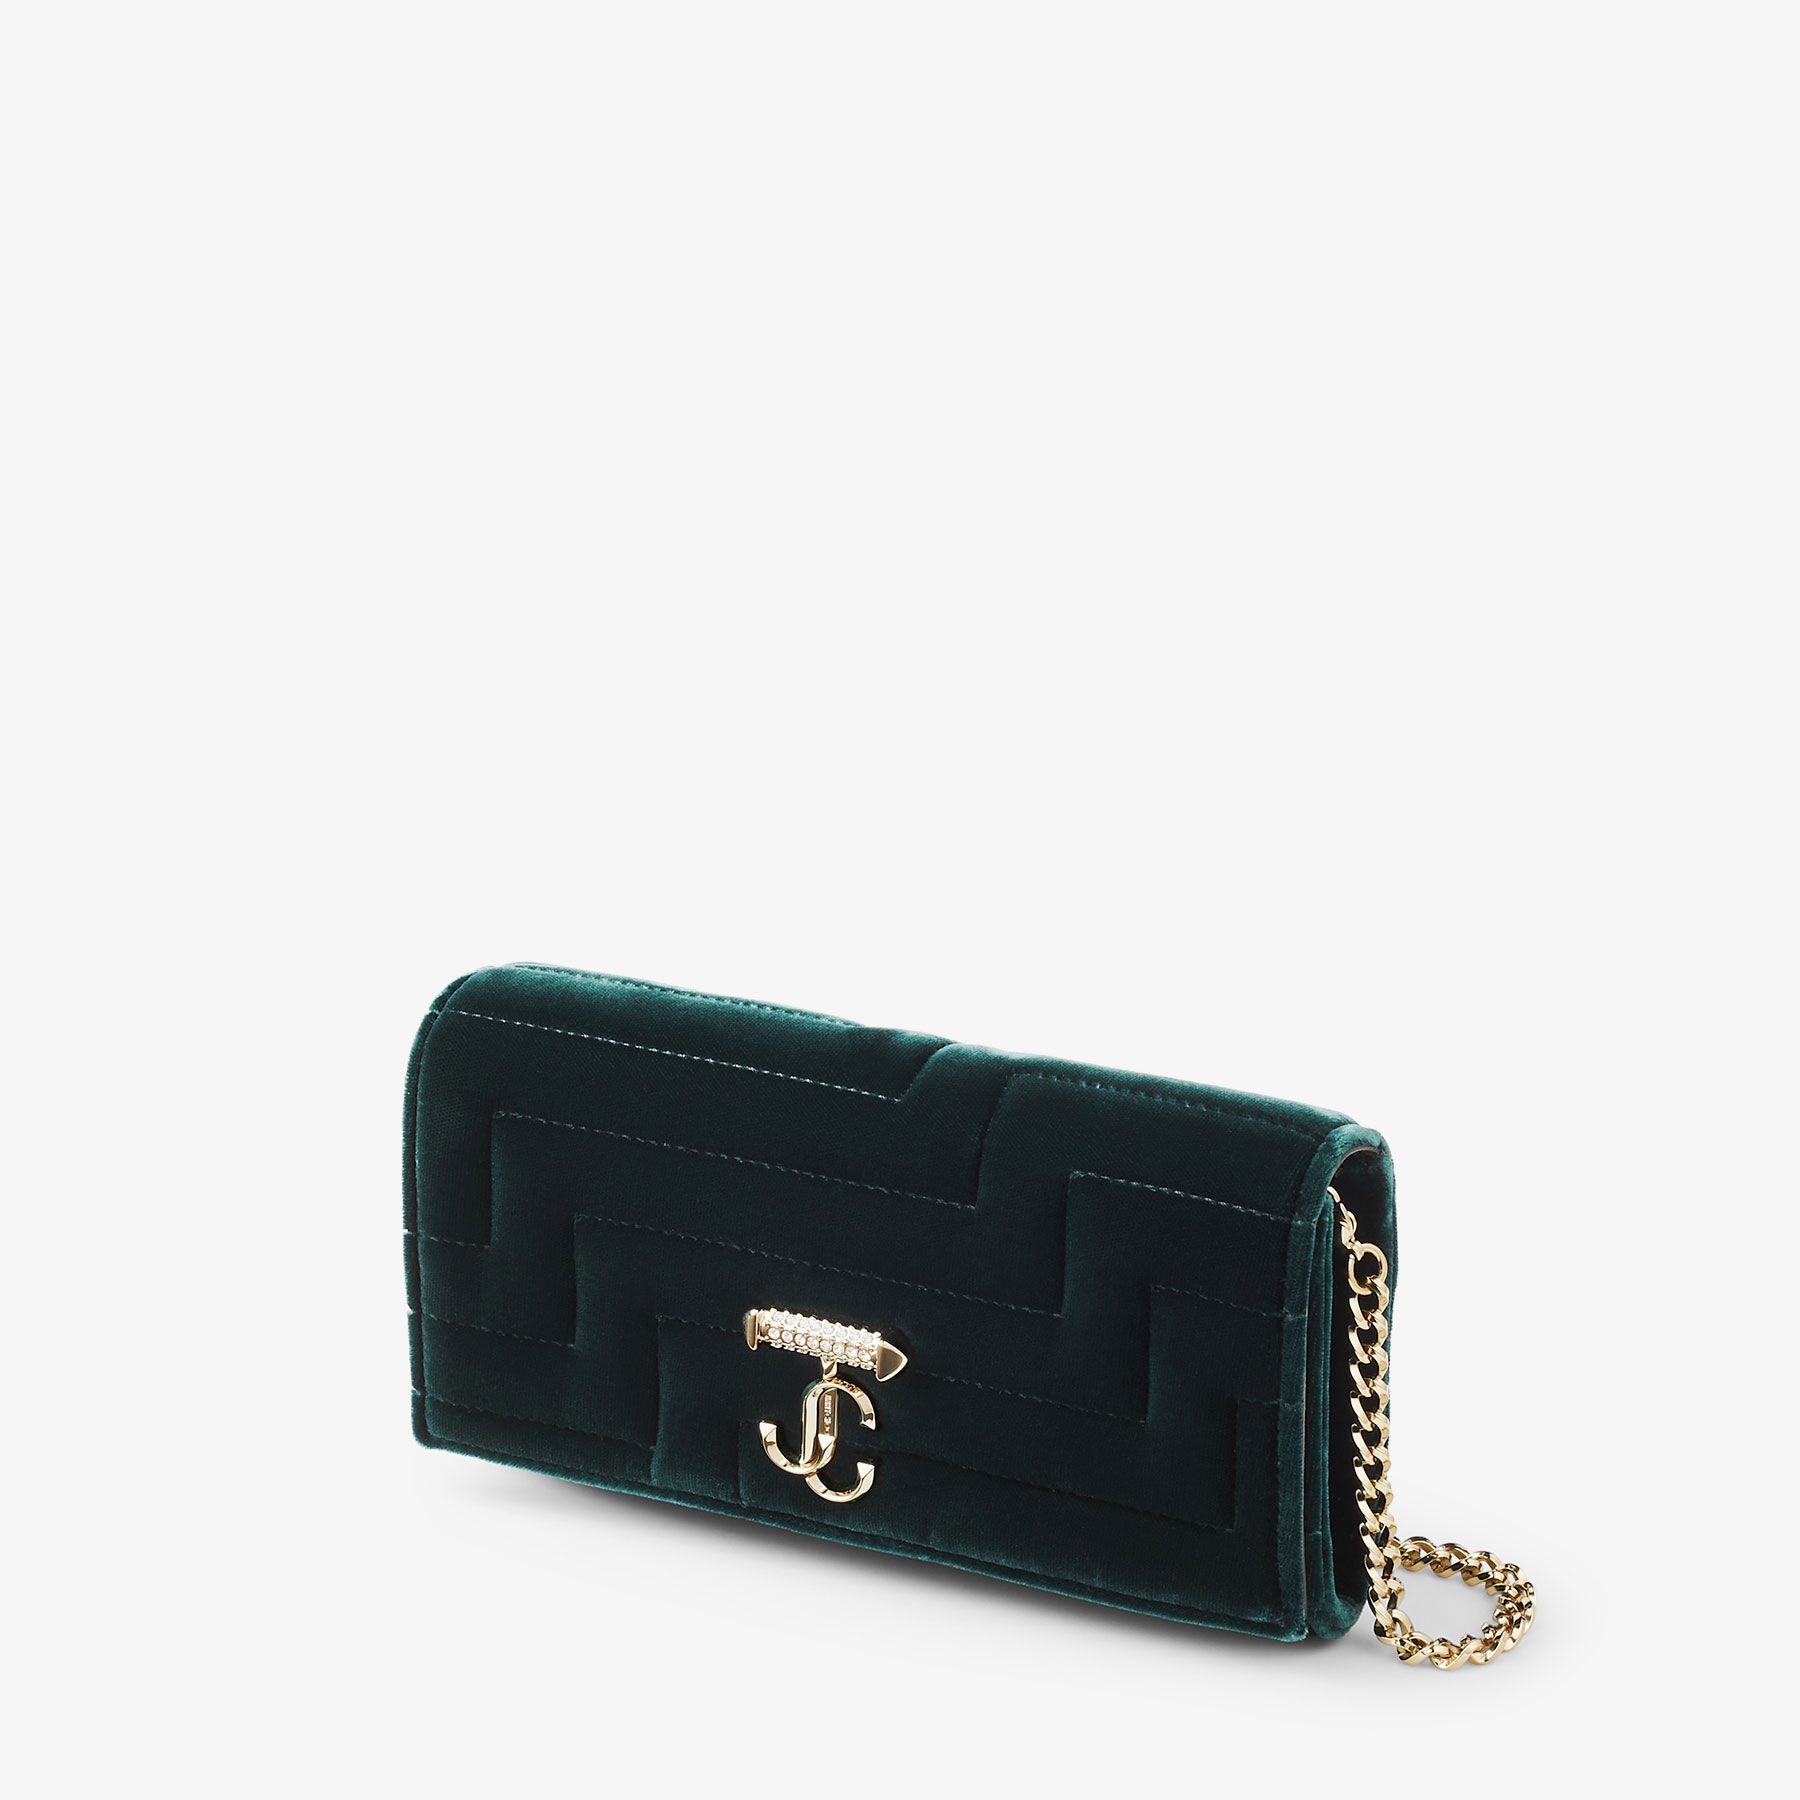 Avenue Wallet with Chain
Dark Green Avenue Velvet Wallet with Chain - 2